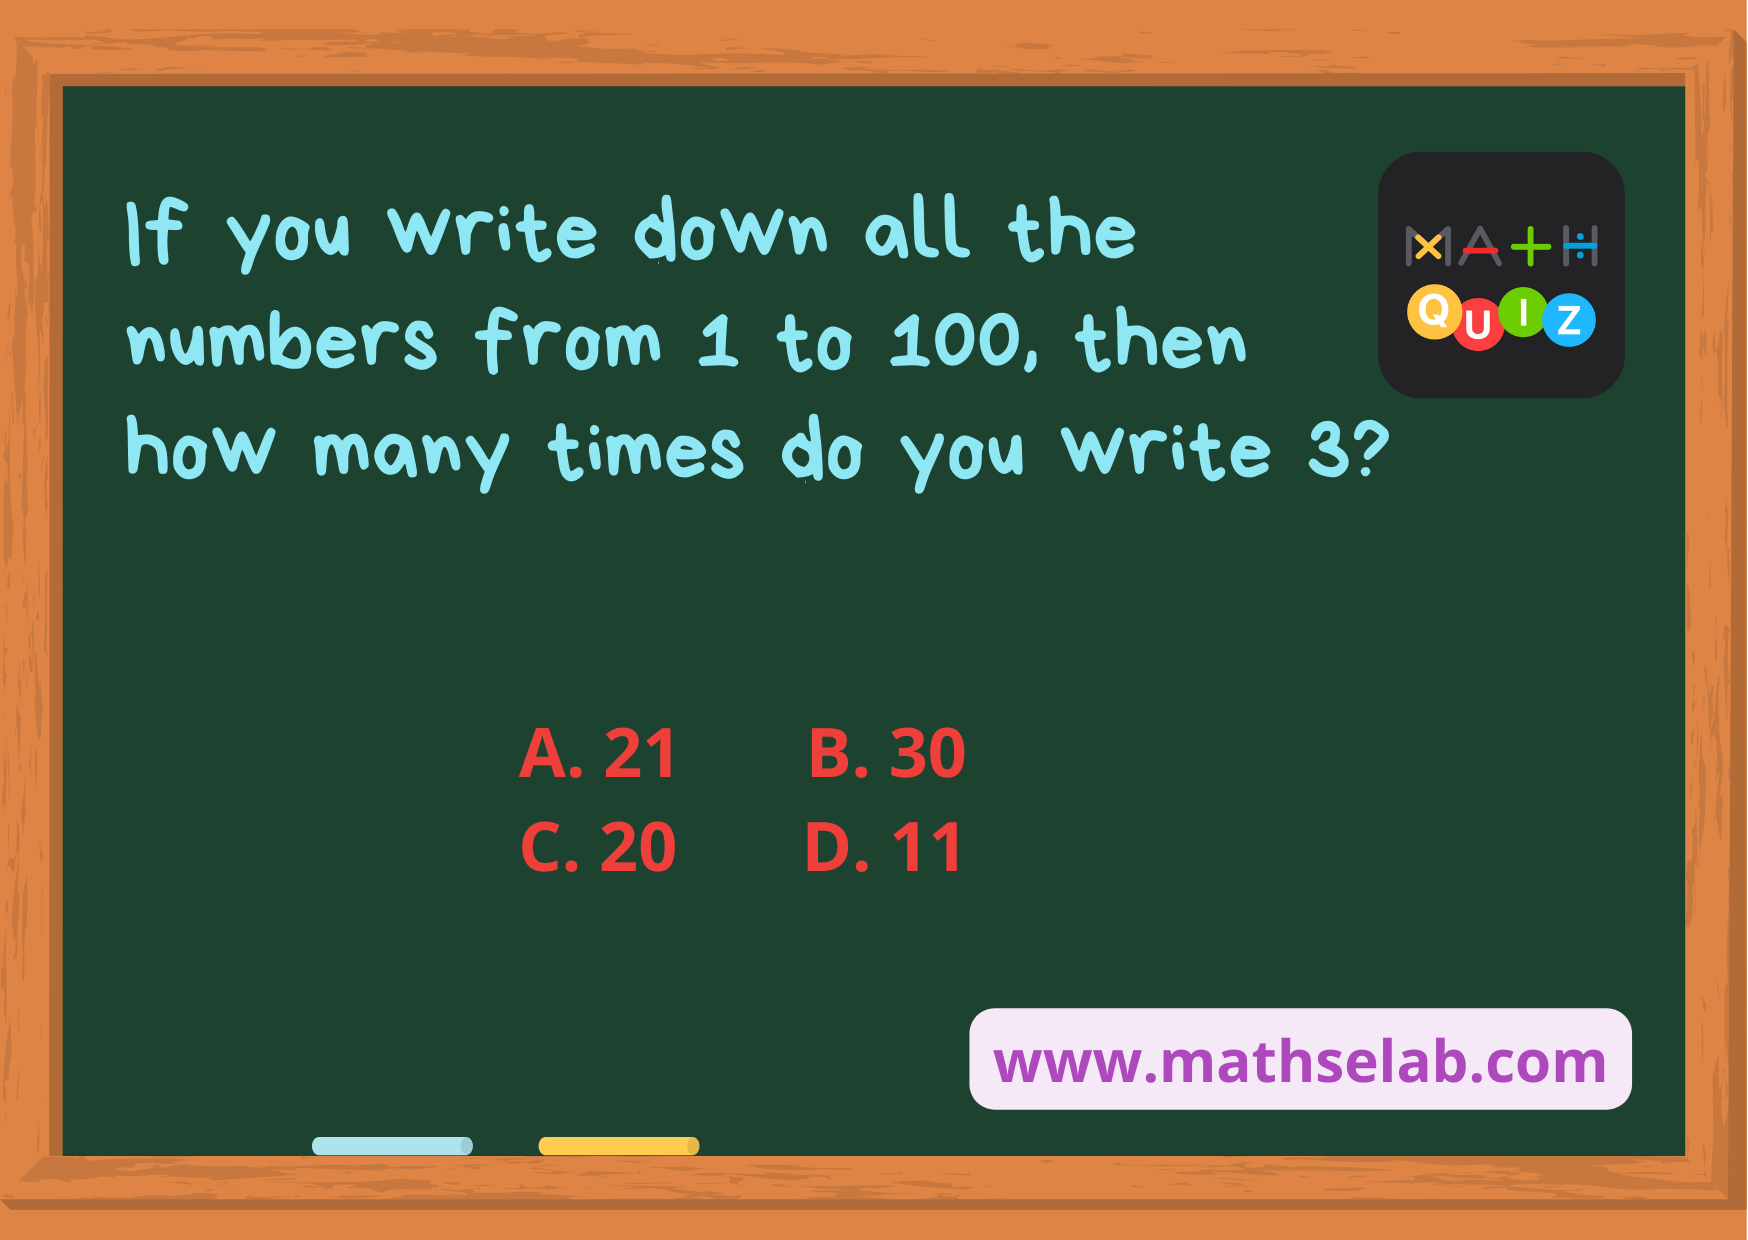 If you write down all the numbers from 1 to 100, then how many times do you write 3 - www.mathselab.com